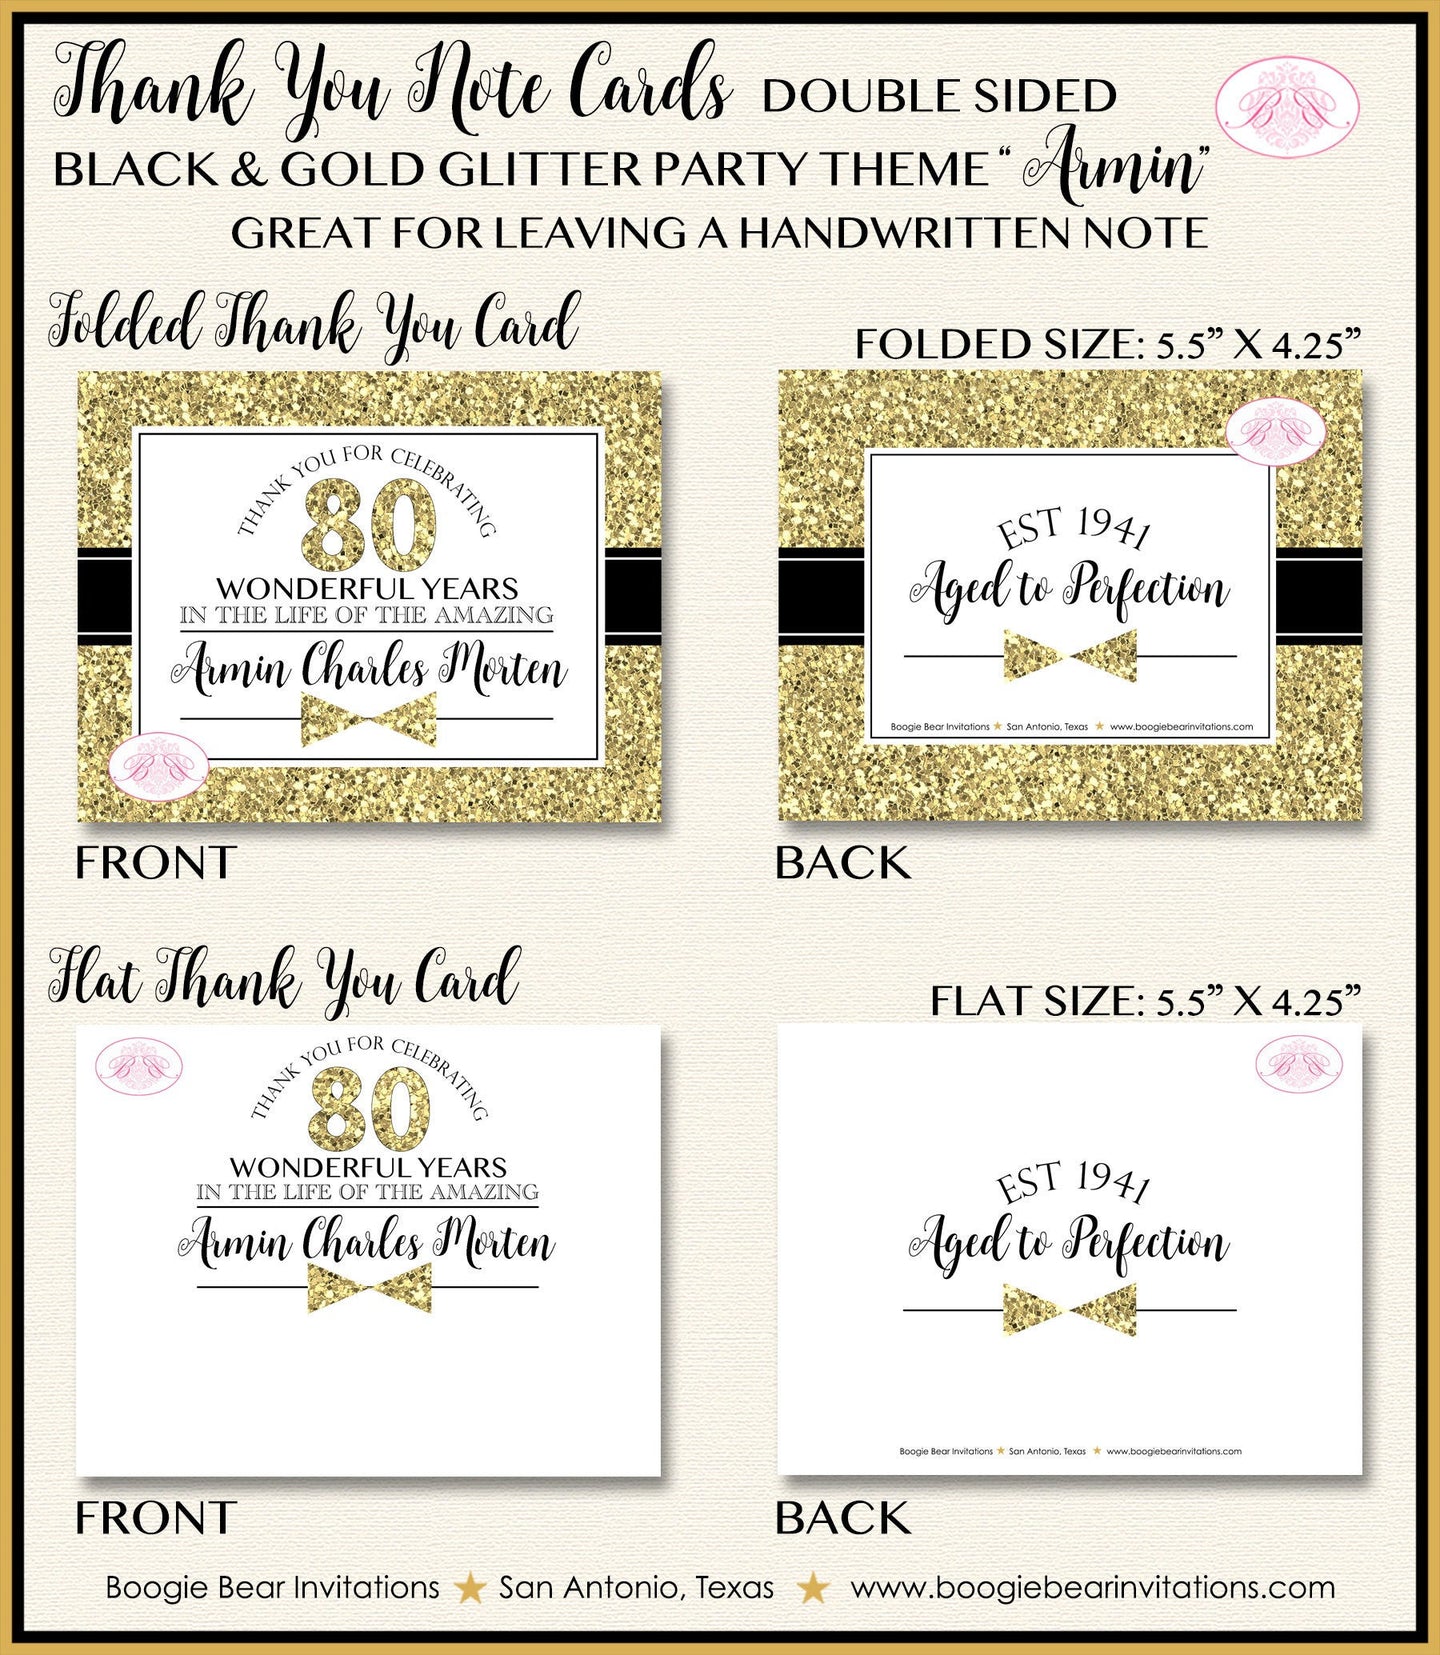 Black Gold Glitter Party Thank You Card Birthday Note Boy Tie Royal Aged To Perfection Formal Boogie Bear Invitations Armin Theme Printed